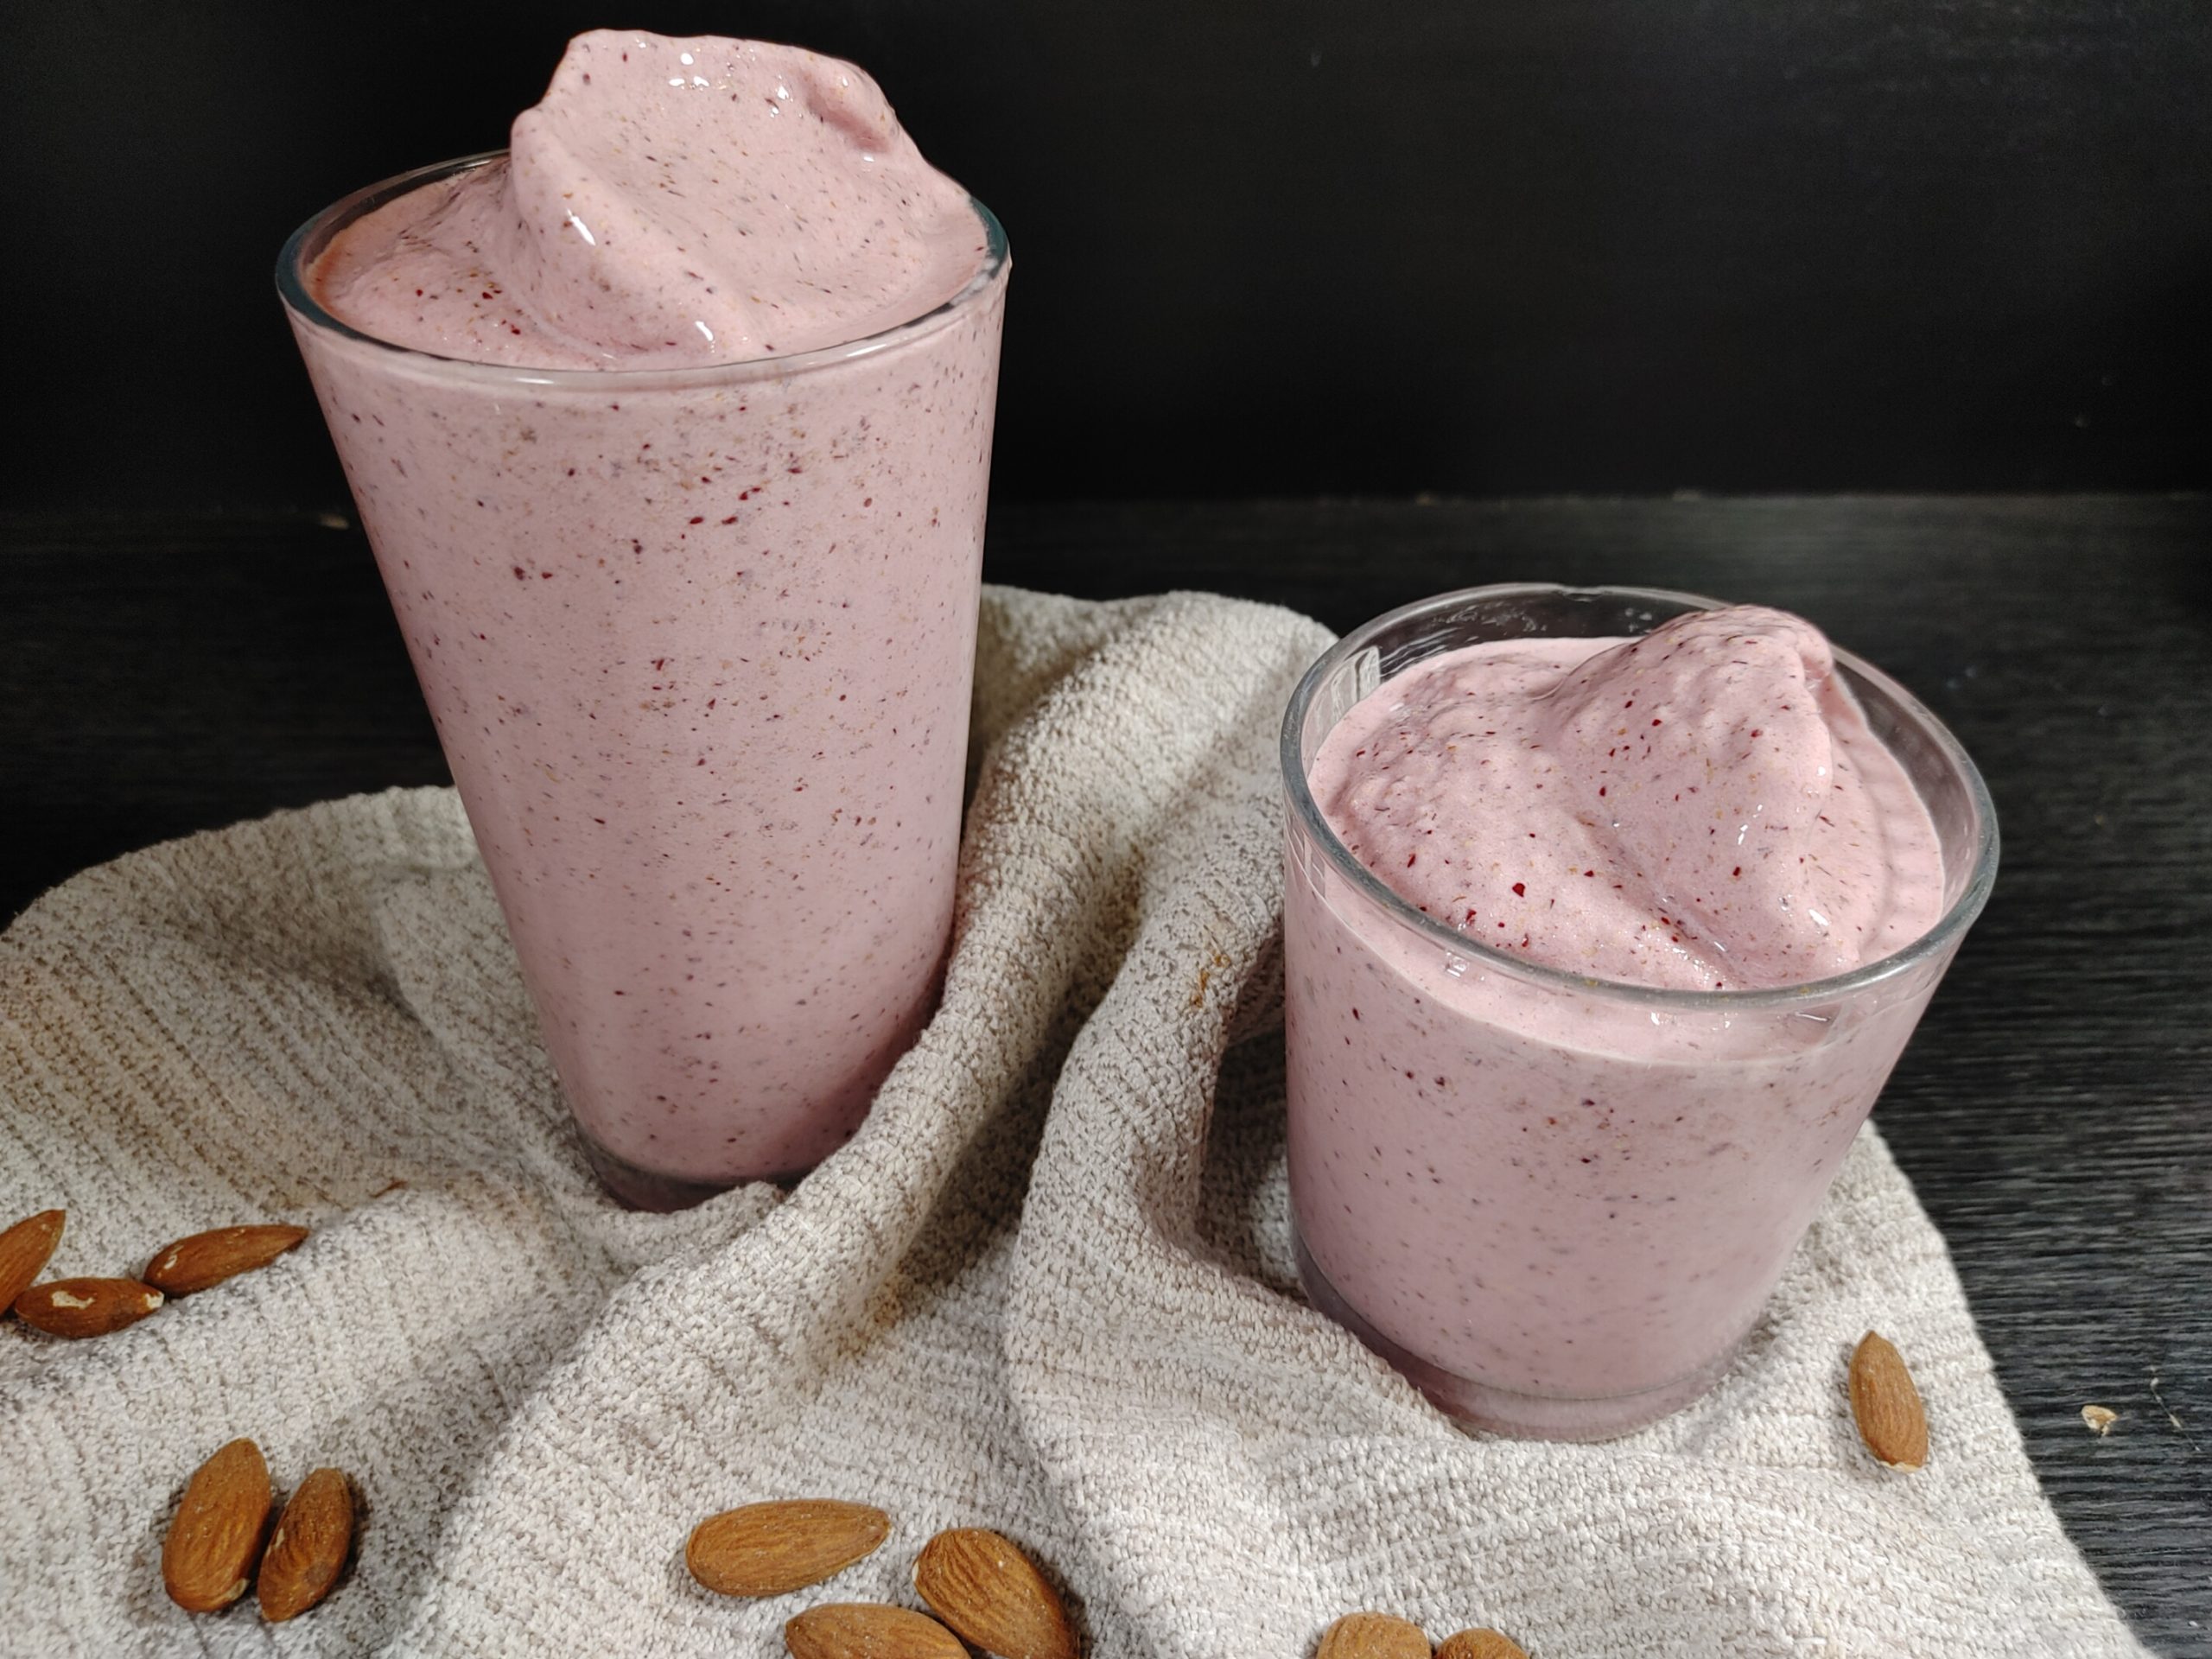 SWEET CHERRY ALMOND SMOOTHIE FEATURED IMAGE